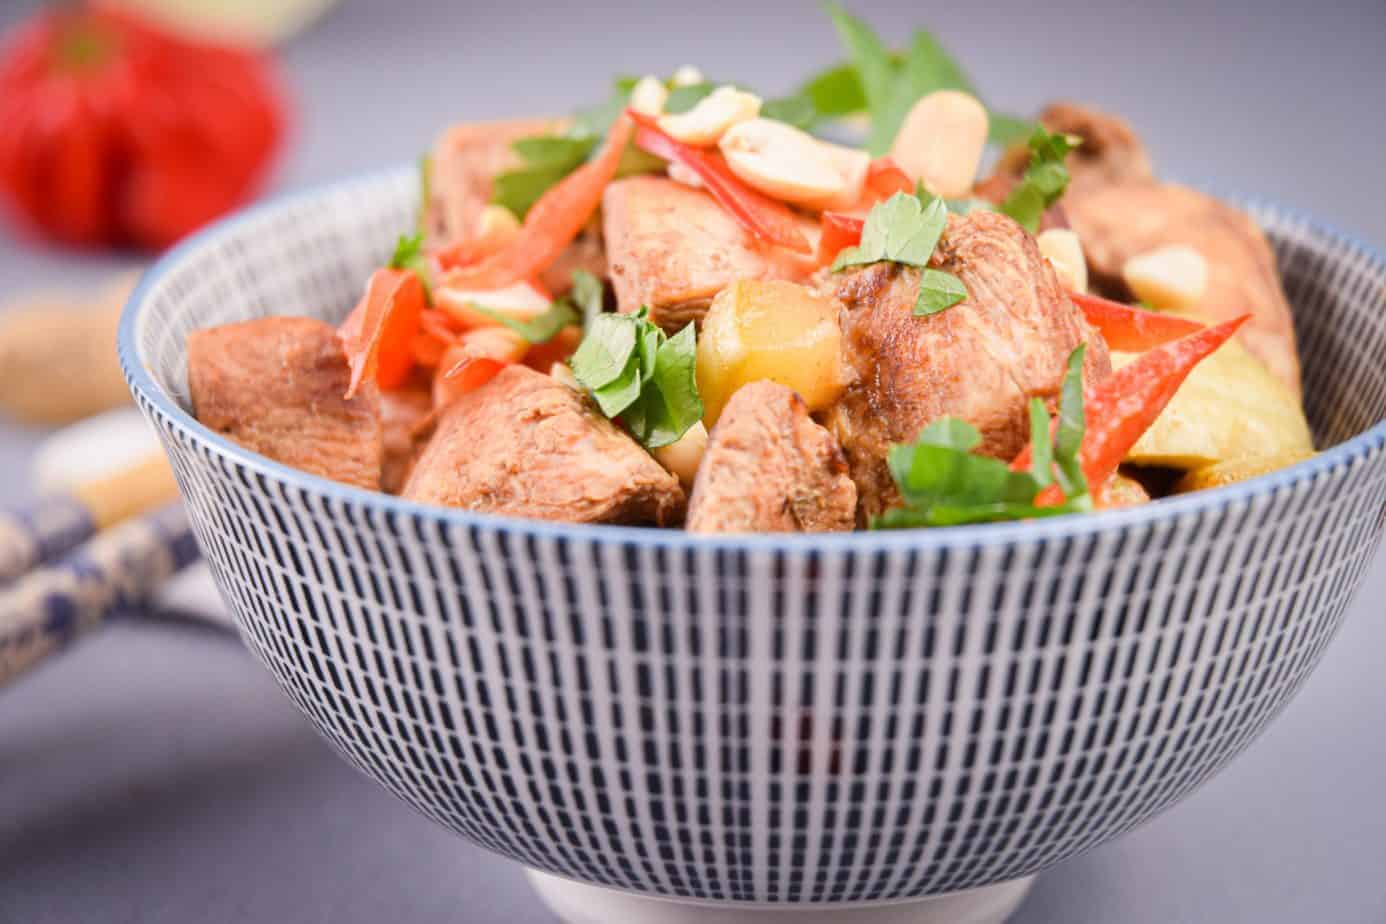 Low-Carb Slow Cooker Thai Peanut Chicken